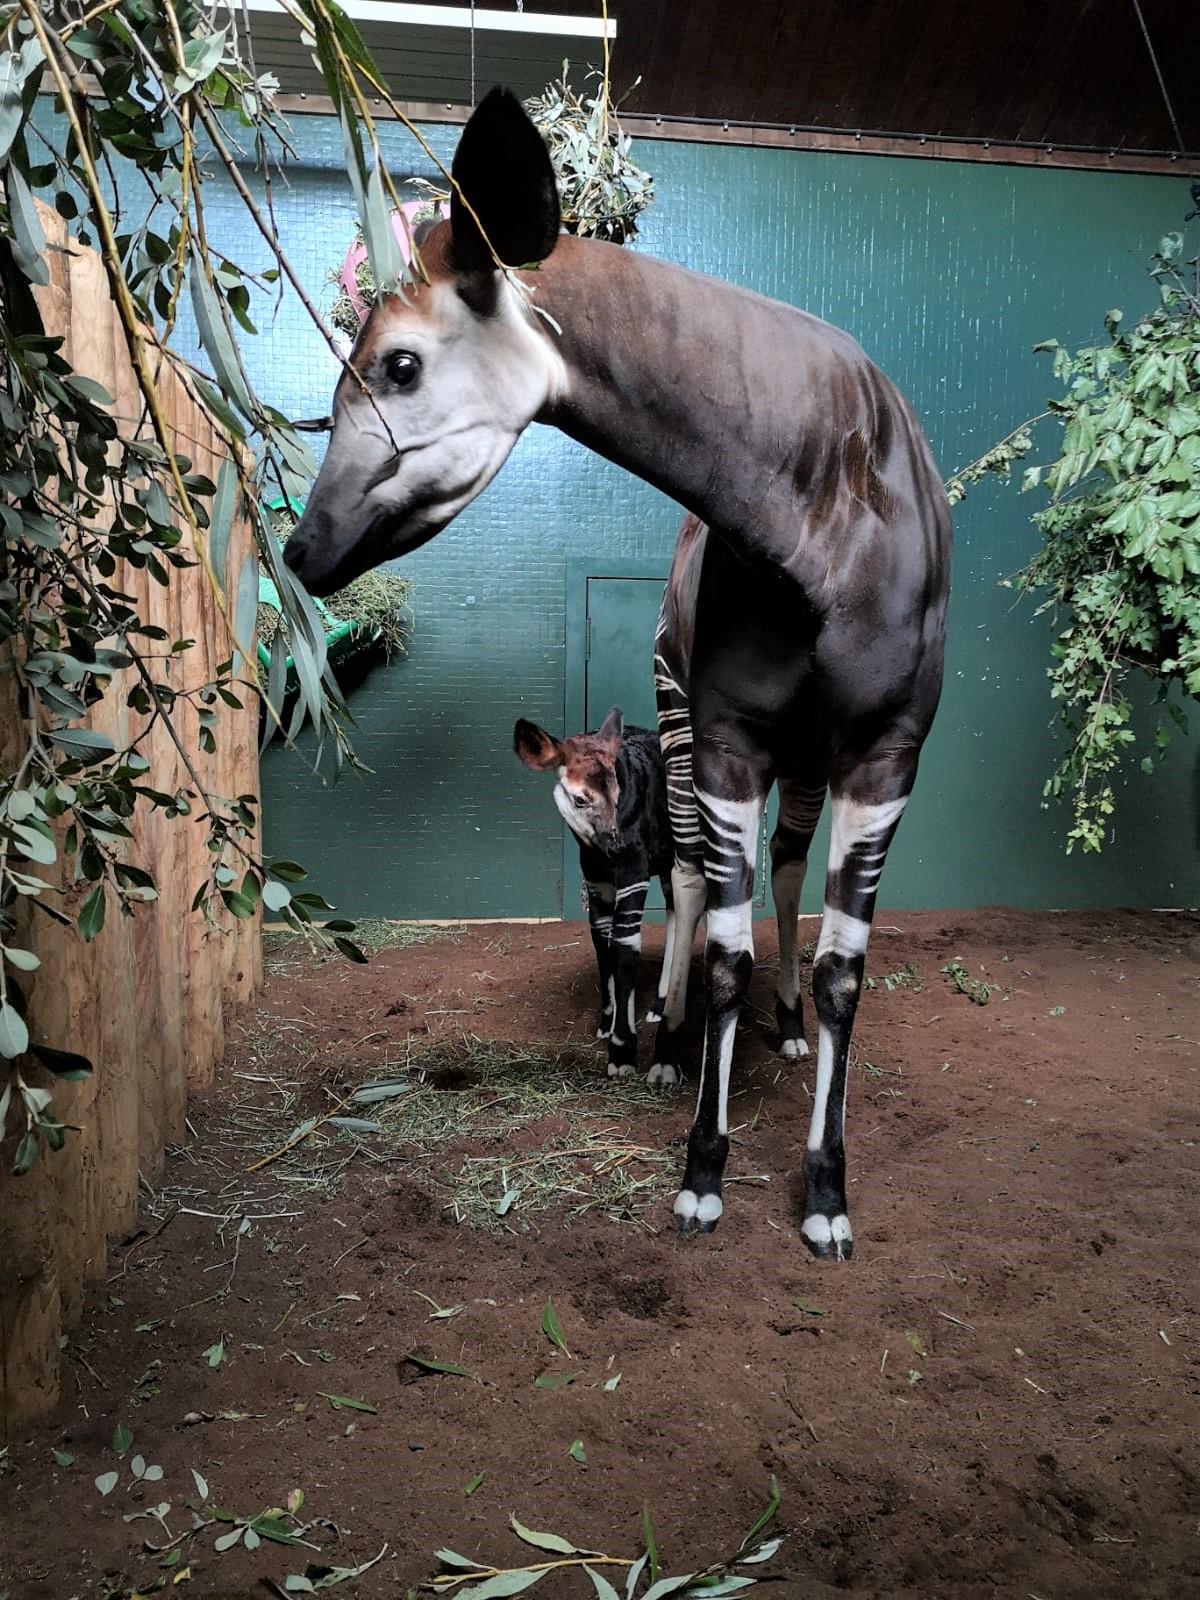 Ede and mom Oni (<a href="https://www.zsl.org/london">ZSL London Zoo</a>)